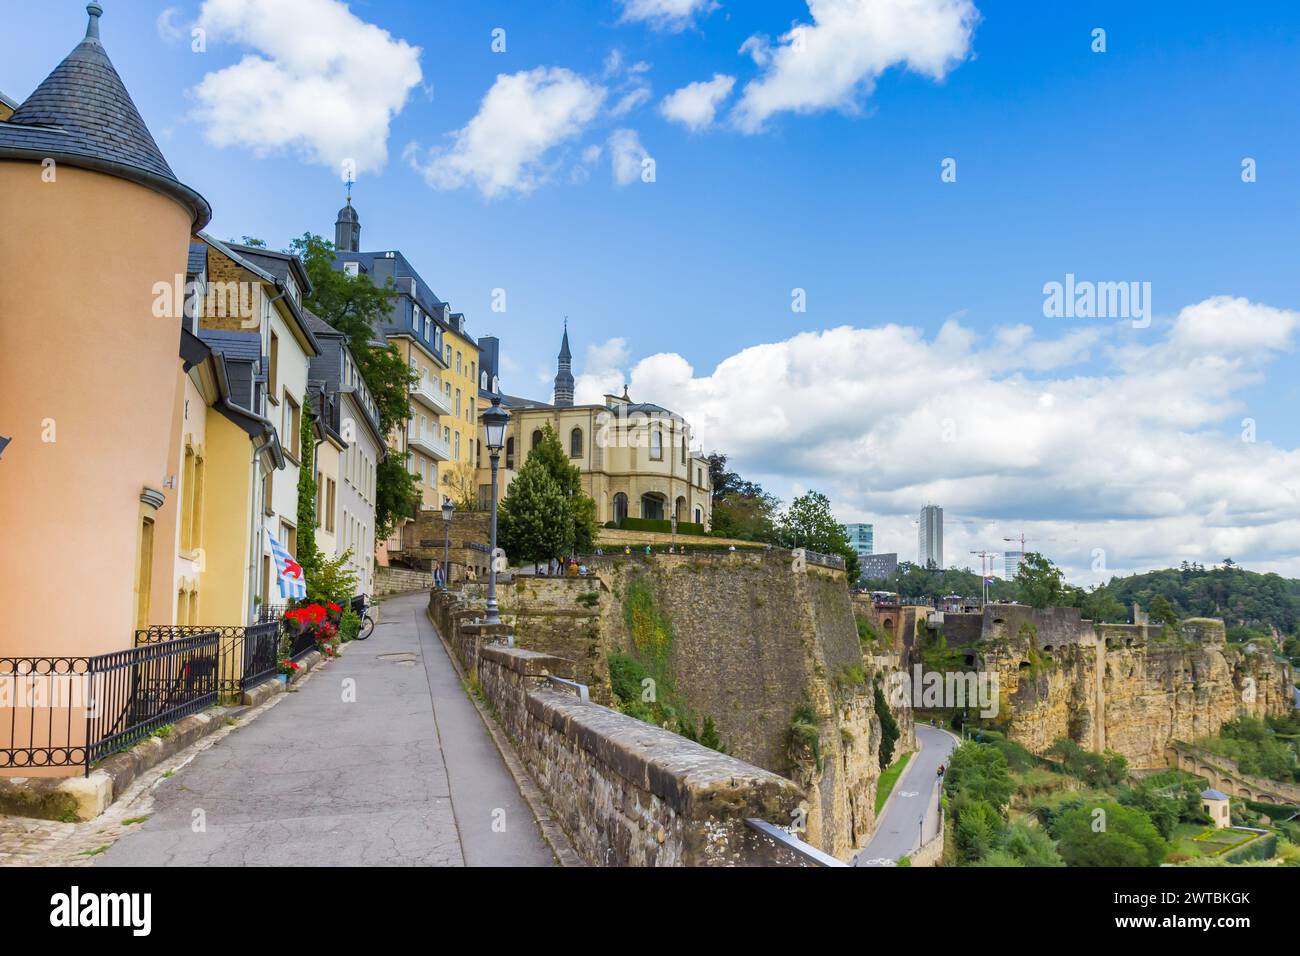 Old street at the historic fortified walls of Luxembourg city Stock Photo